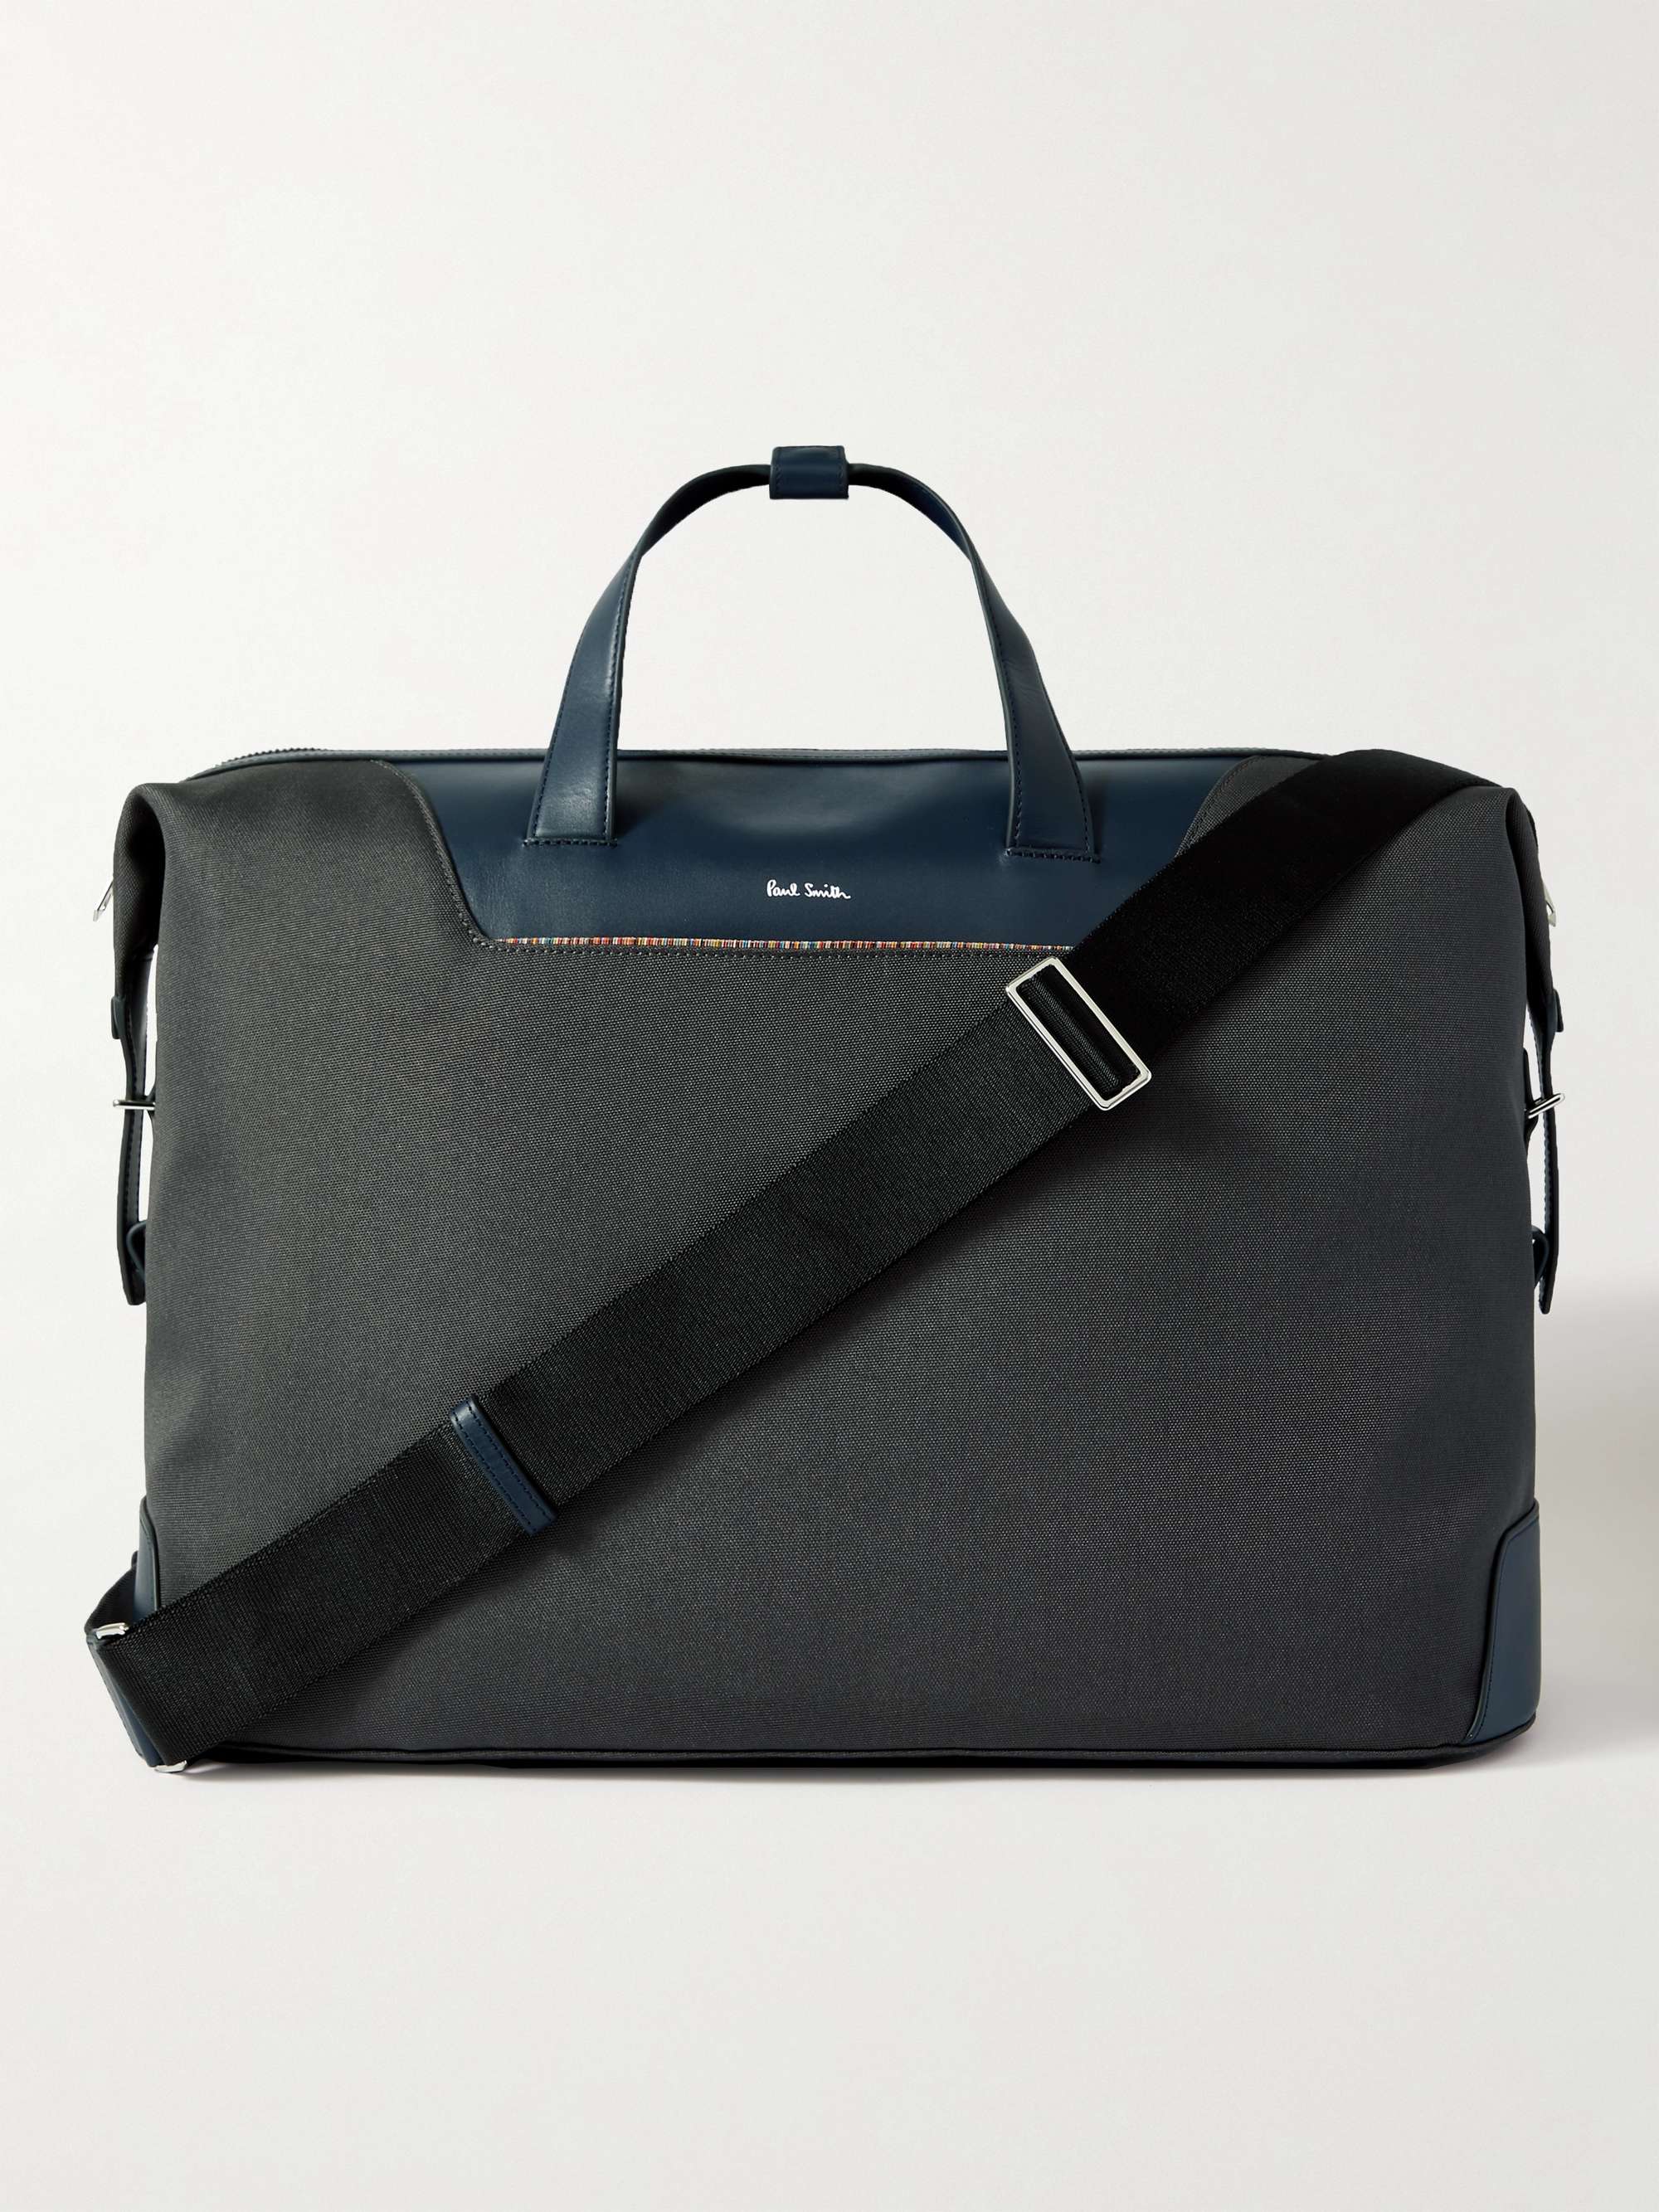 PAUL SMITH Leather-Trimmed Canvas Holdall